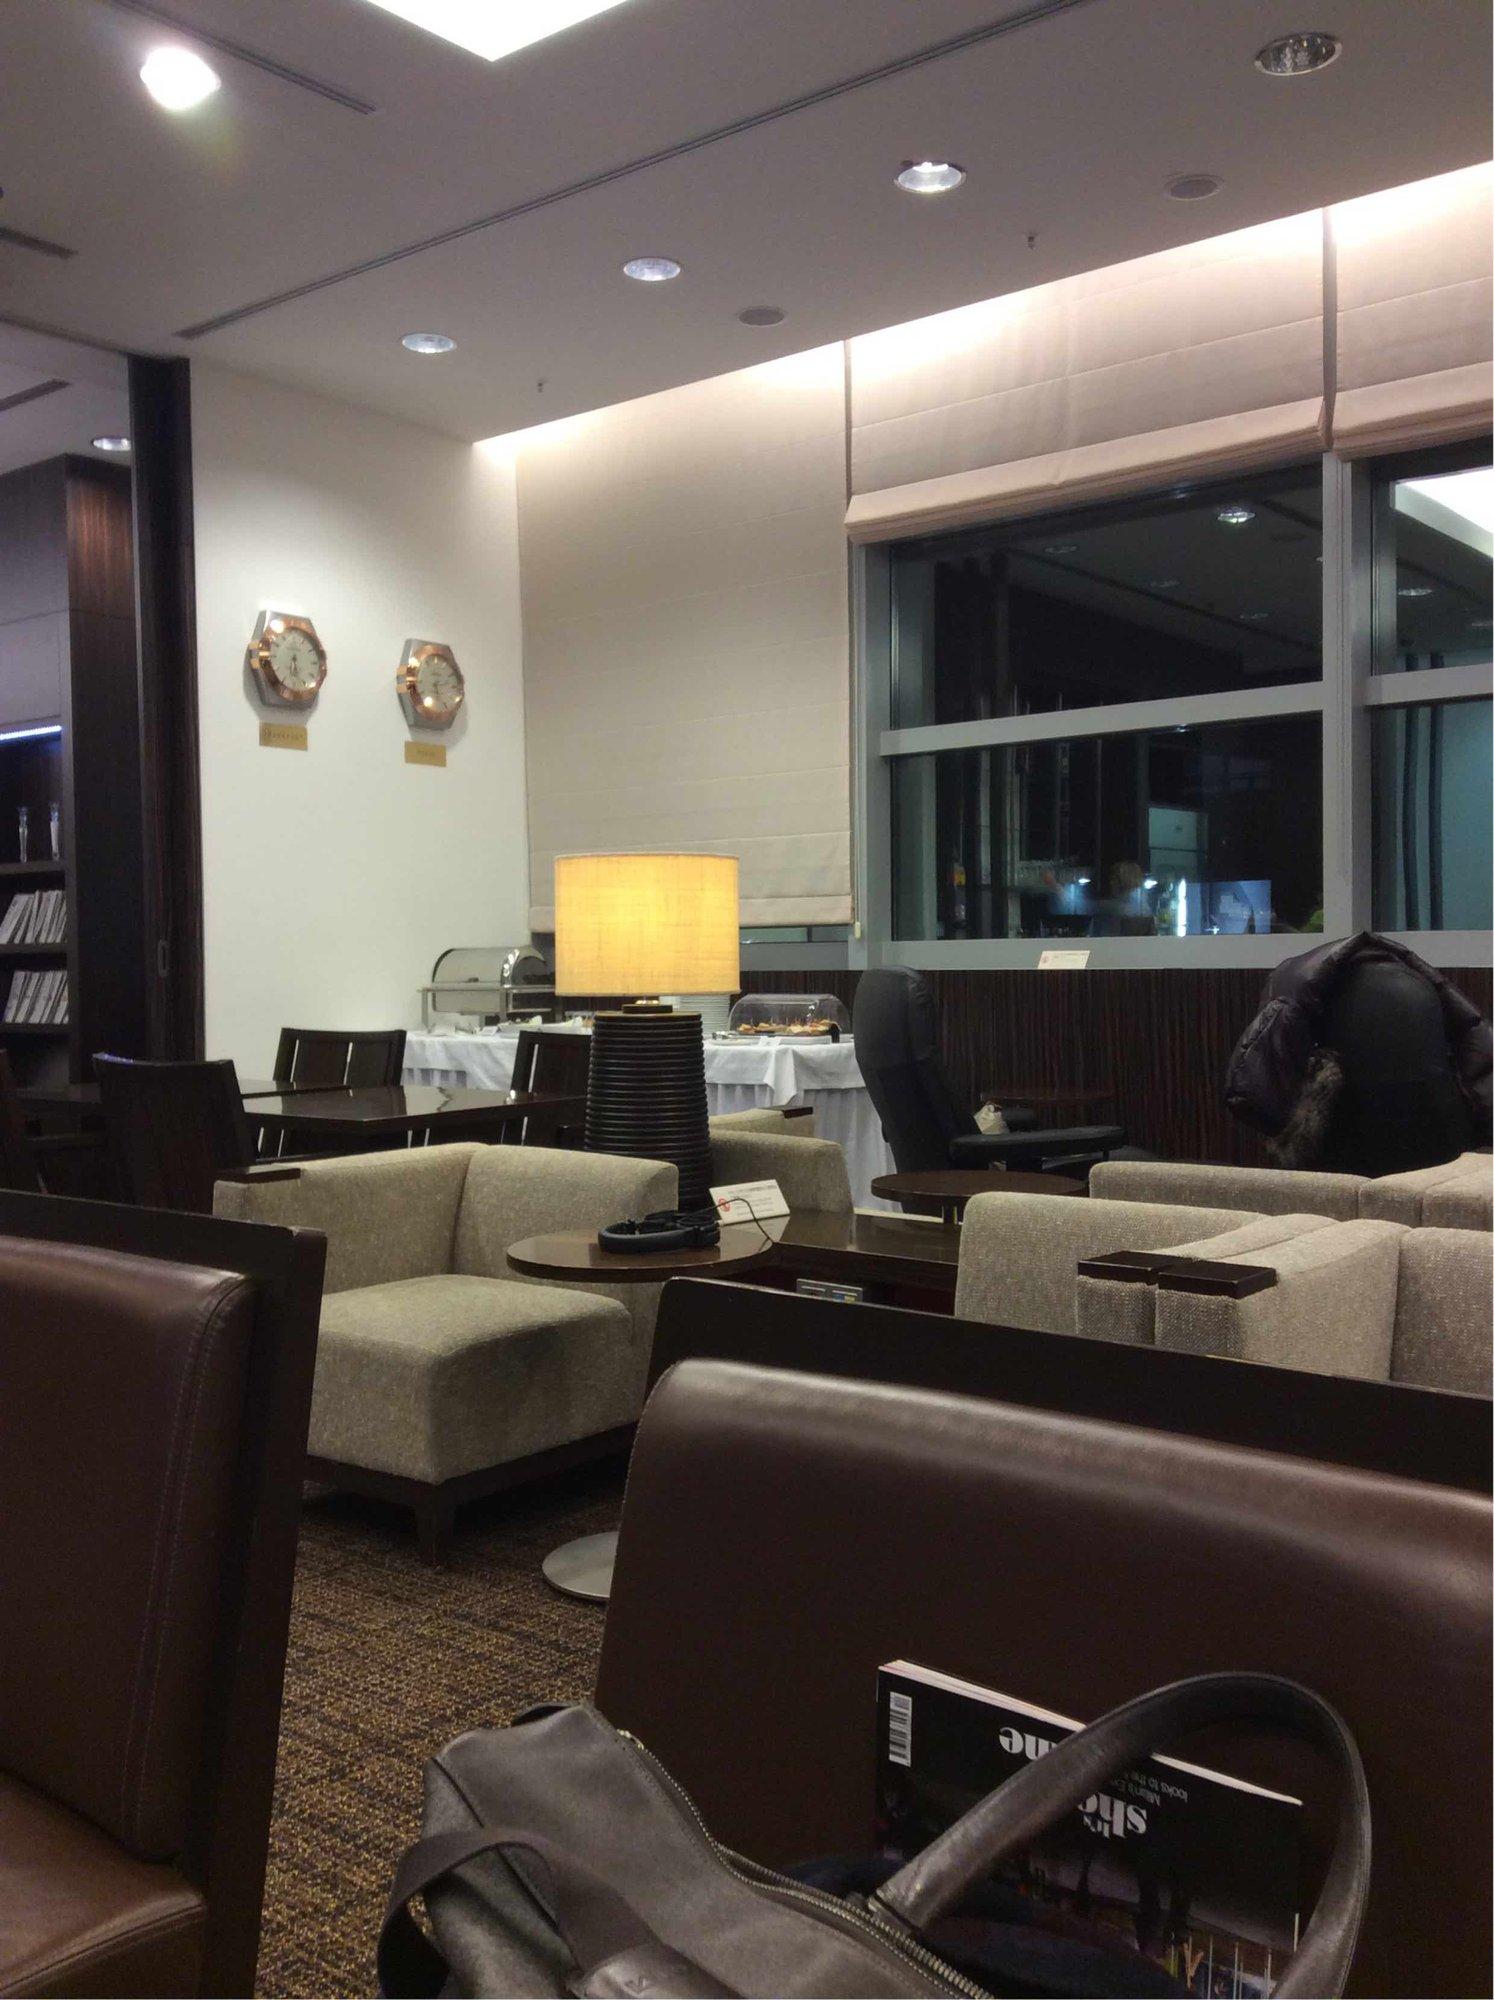 Japan Airlines JAL First Class Lounge image 4 of 10